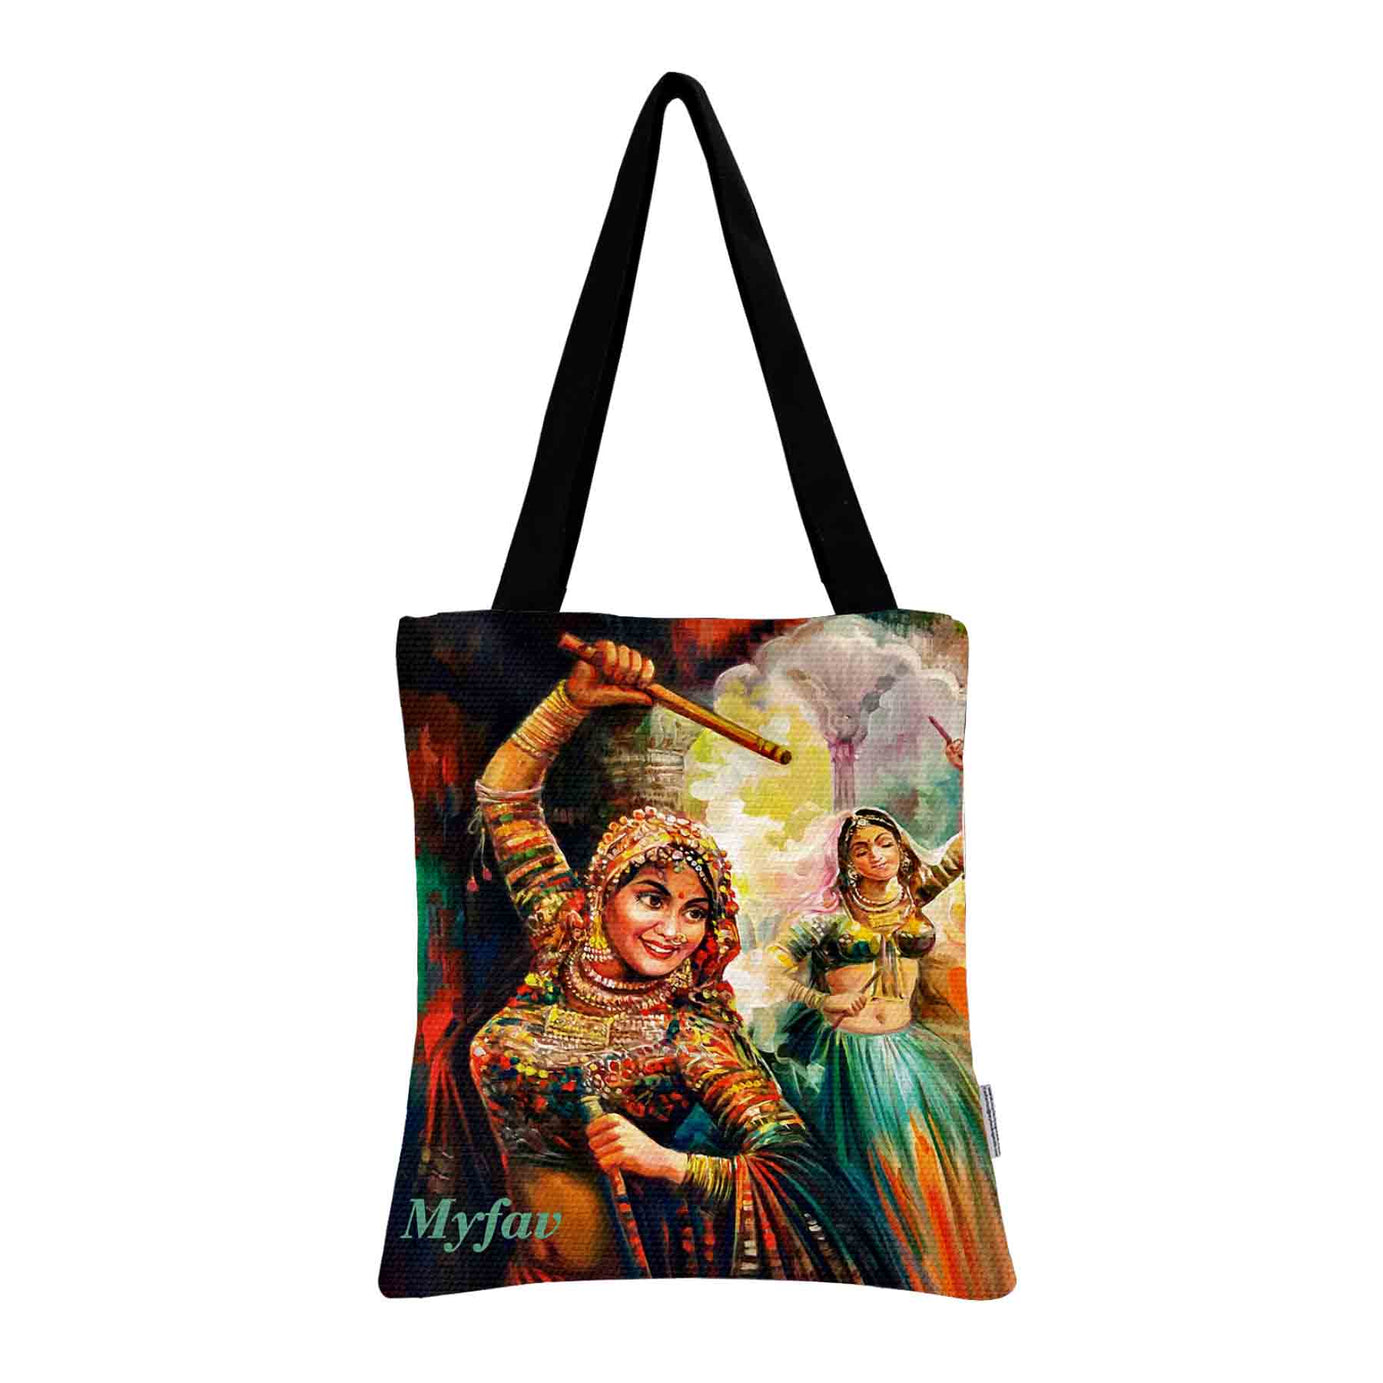 My Fav Traditional Dance Print Cotton Canvas Tote Bag